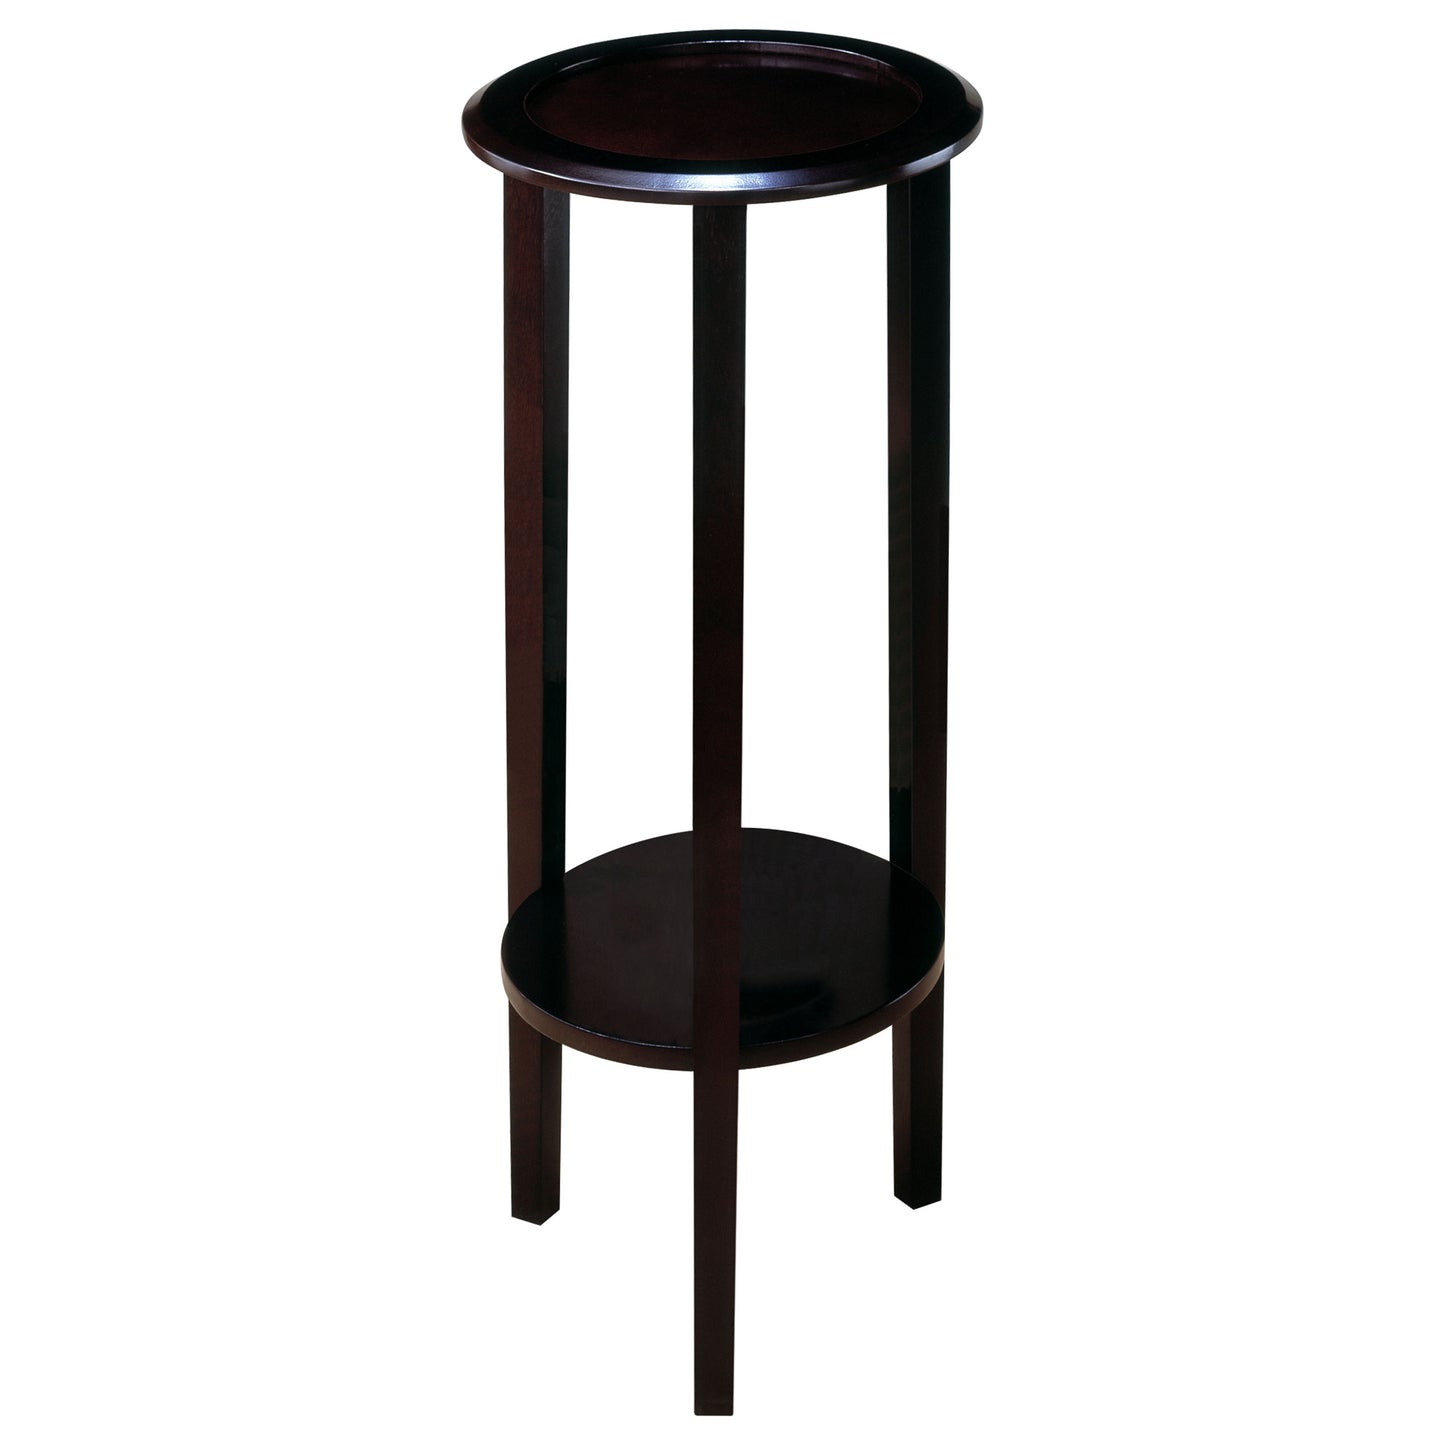 Kirk Round Accent Table with Bottom Shelf Espresso